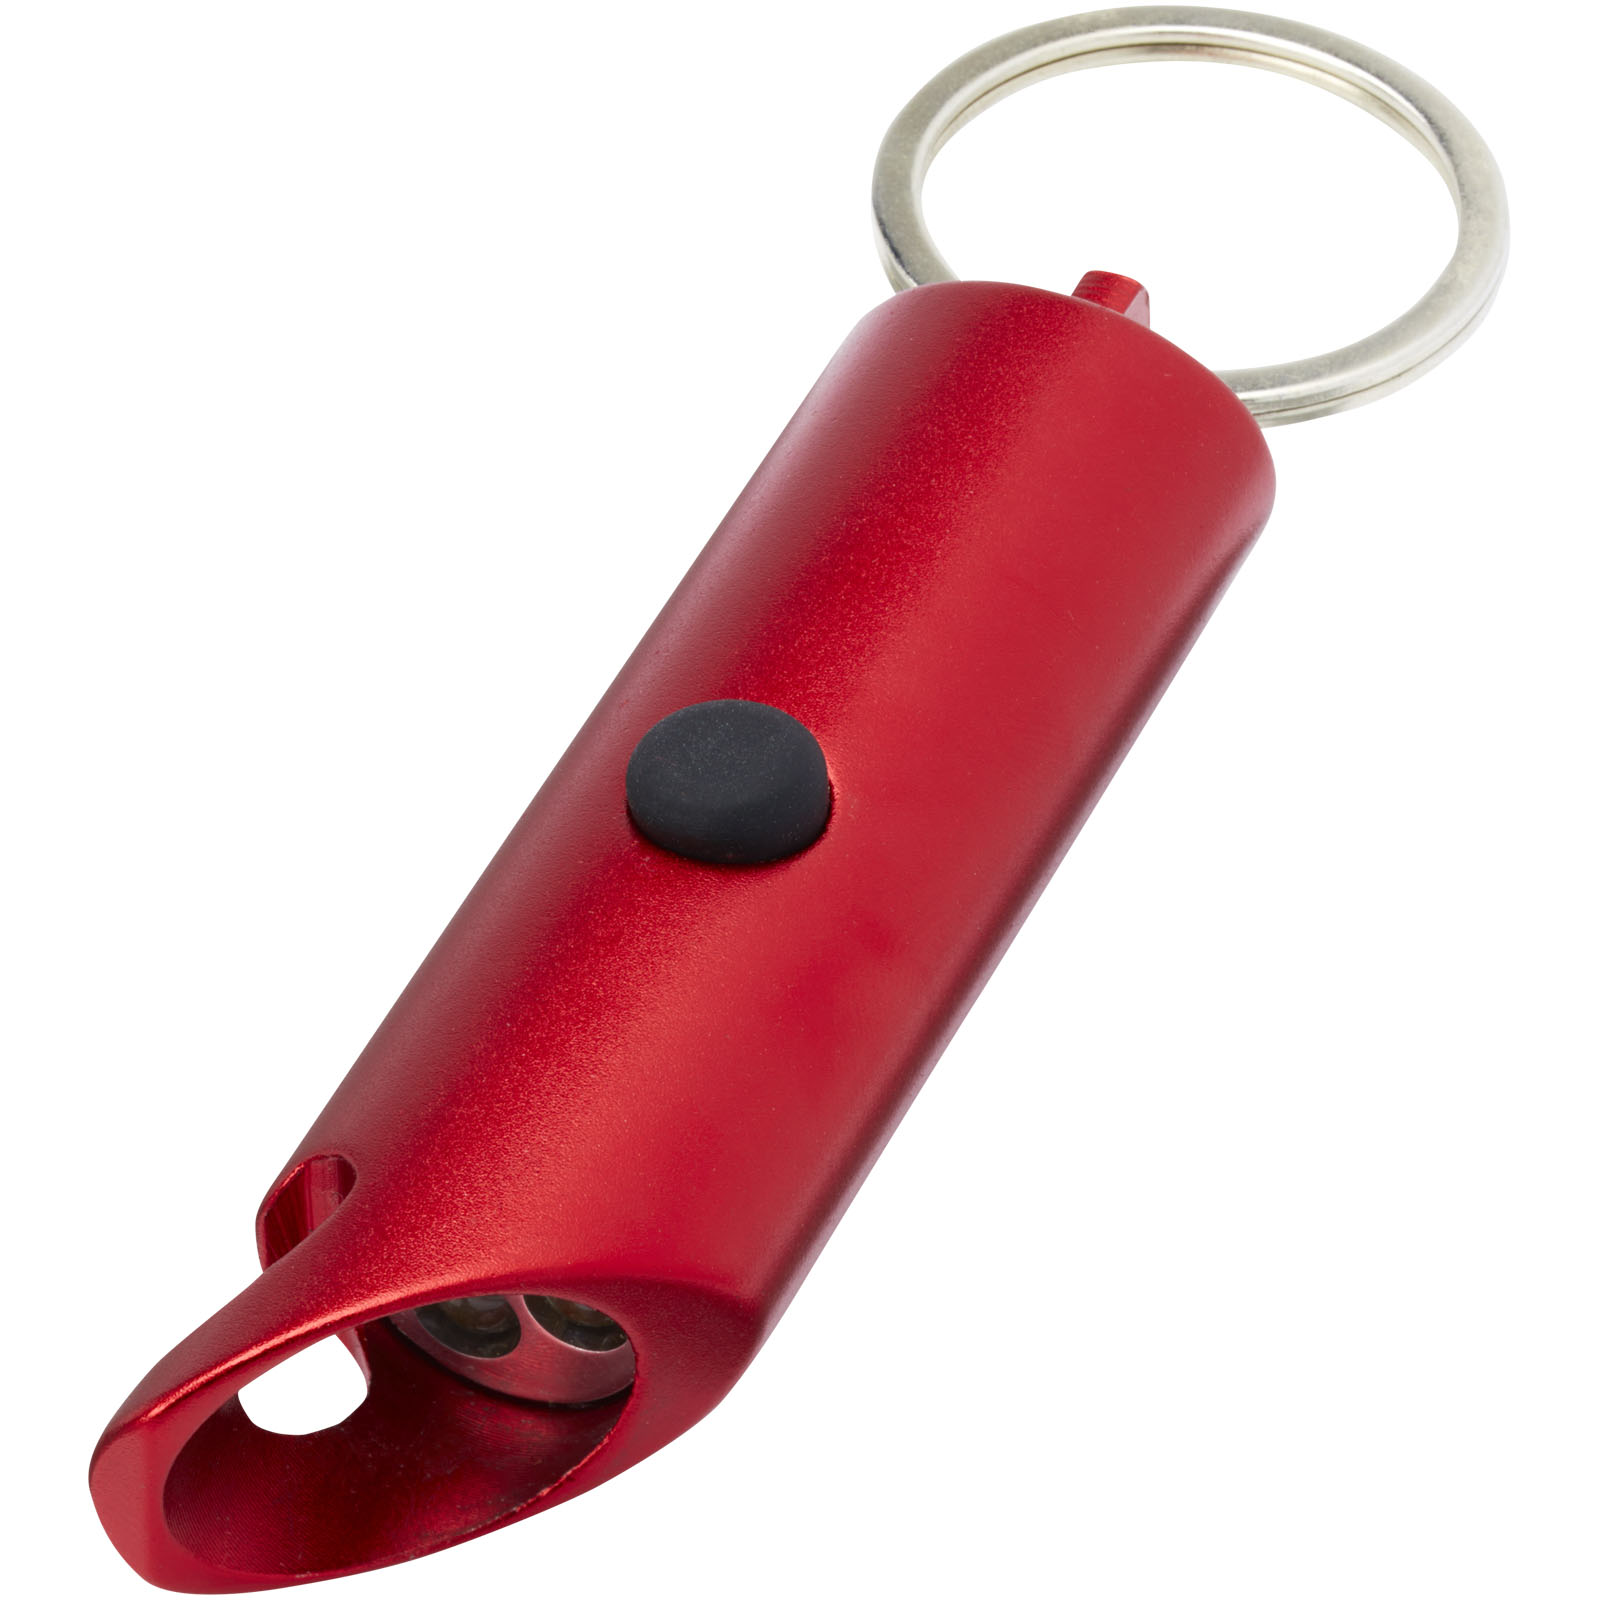 Advertising Lamps - Flare RCS recycled aluminium IPX LED light and bottle opener with keychain - 3